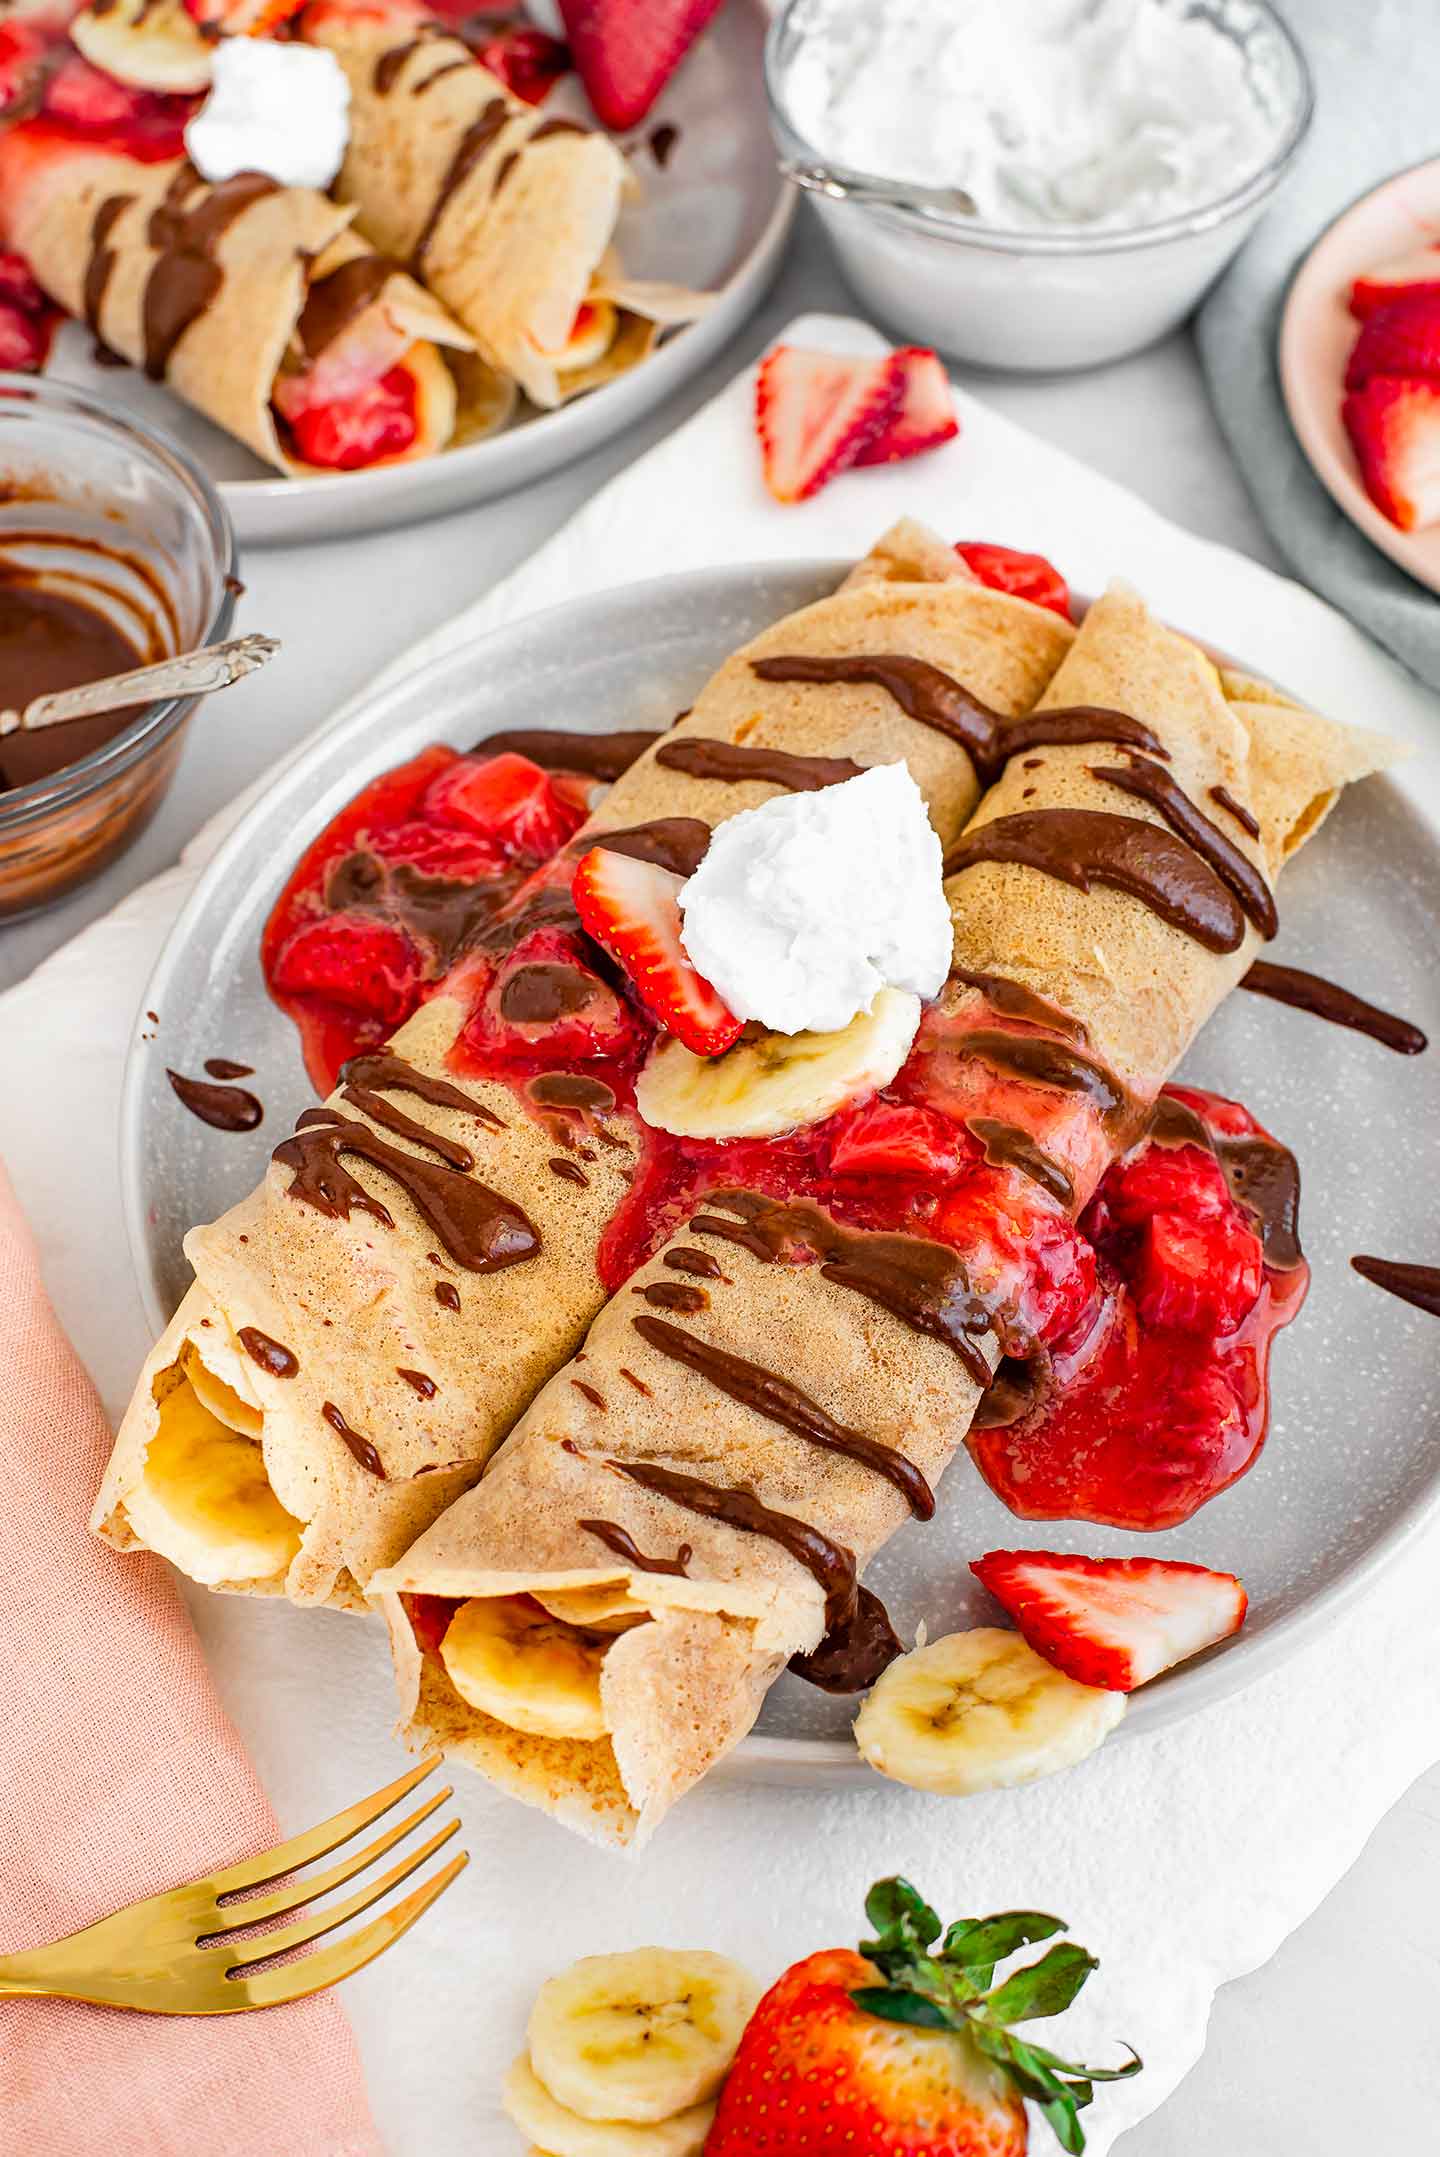 Side view of two crepes on a plate topped with strawberry sauce, chocolate drizzle and whipped cream. Another plate of crepes and more whipped cream are in the background.